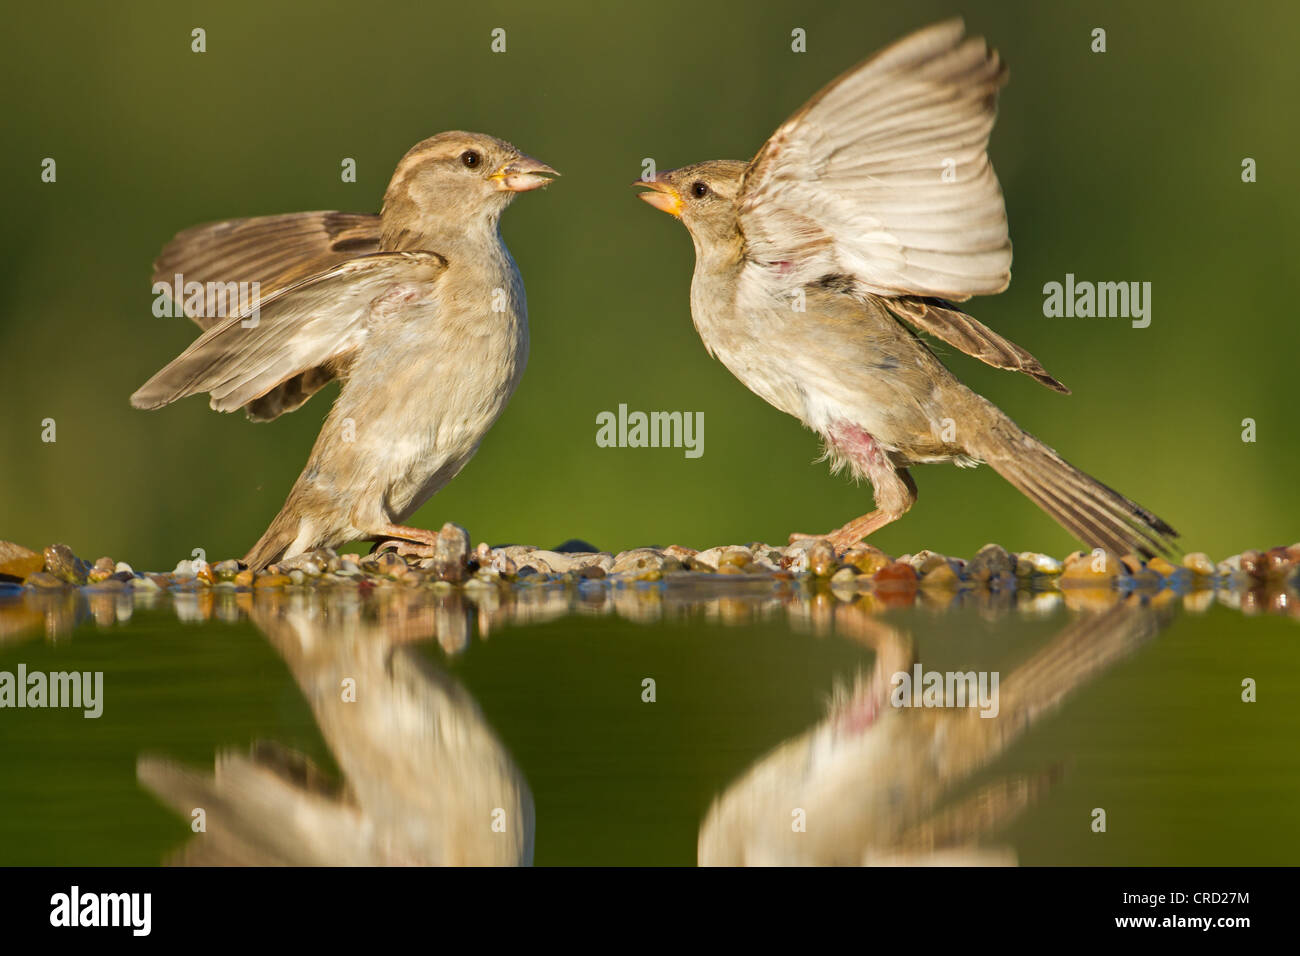 Two house sparrows (Passer domesticus) by the water Stock Photo